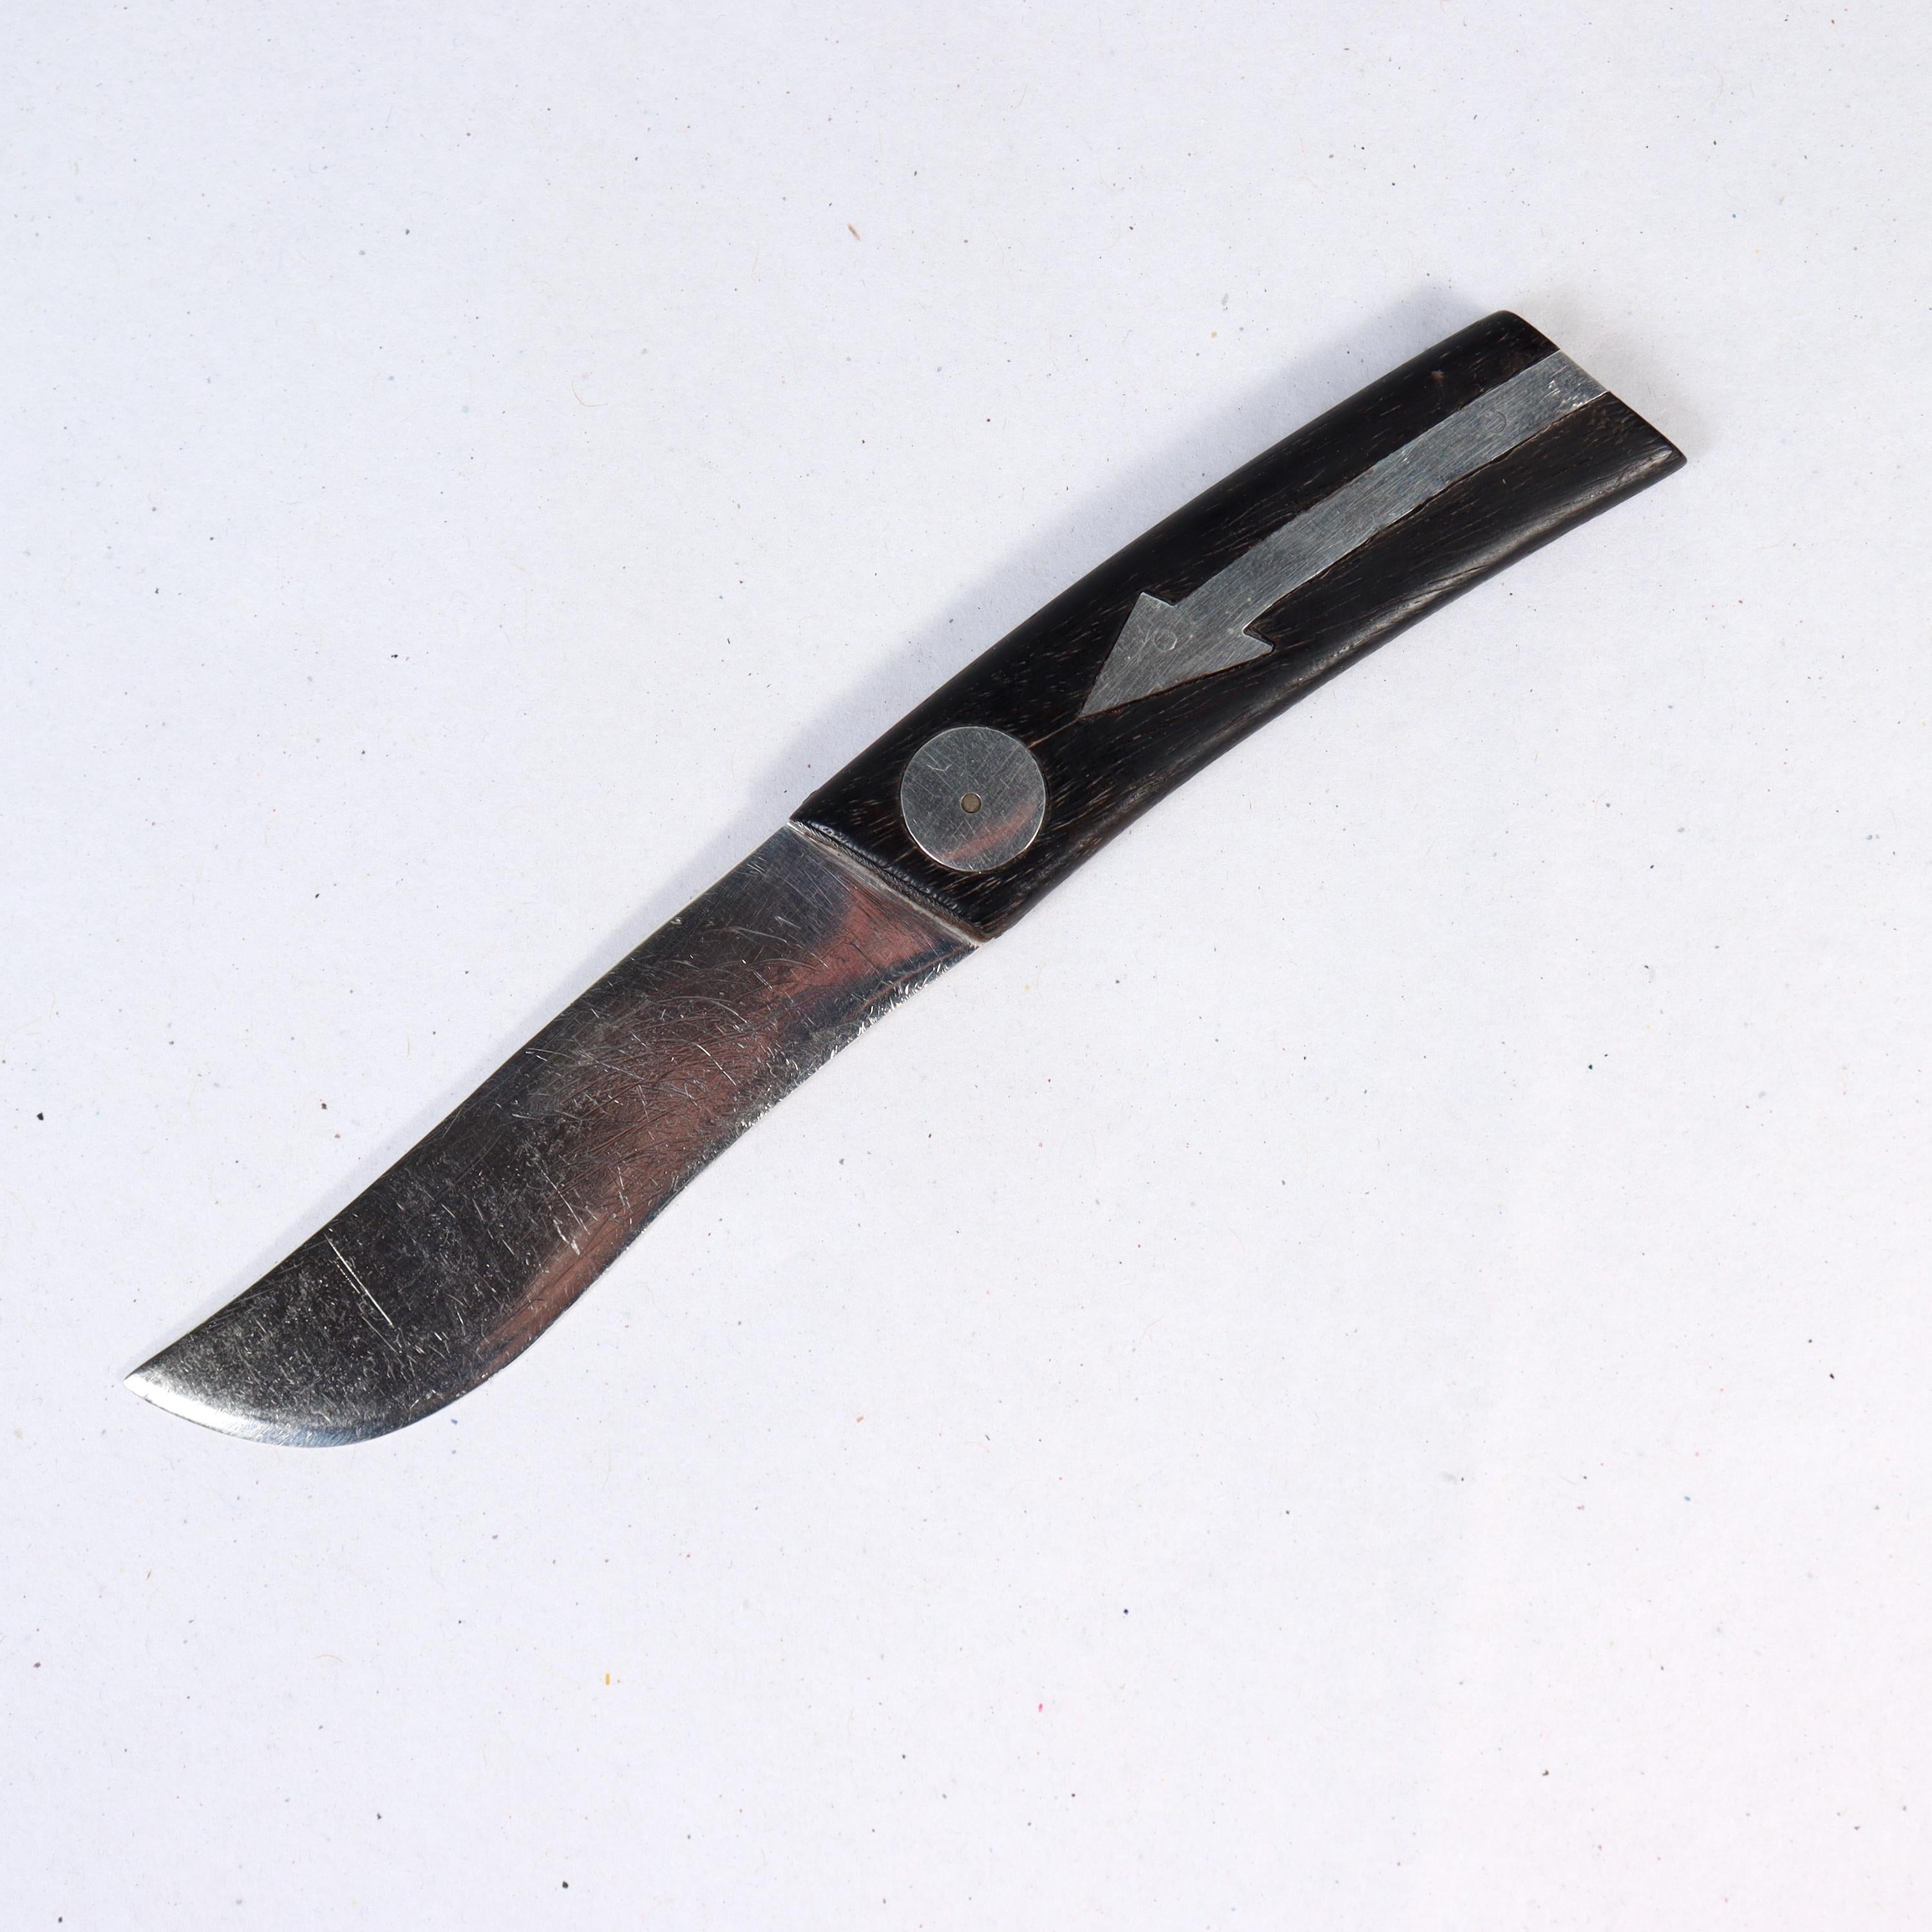 A fine Mexican Modernist cheese or bar knife.

By William Spratling.

In sterling silver. 

With a shaped sterling silver blade and an ebony handle with sterling silver inlaid elements, including arrows and discs.

Simply a great, diminutive knife